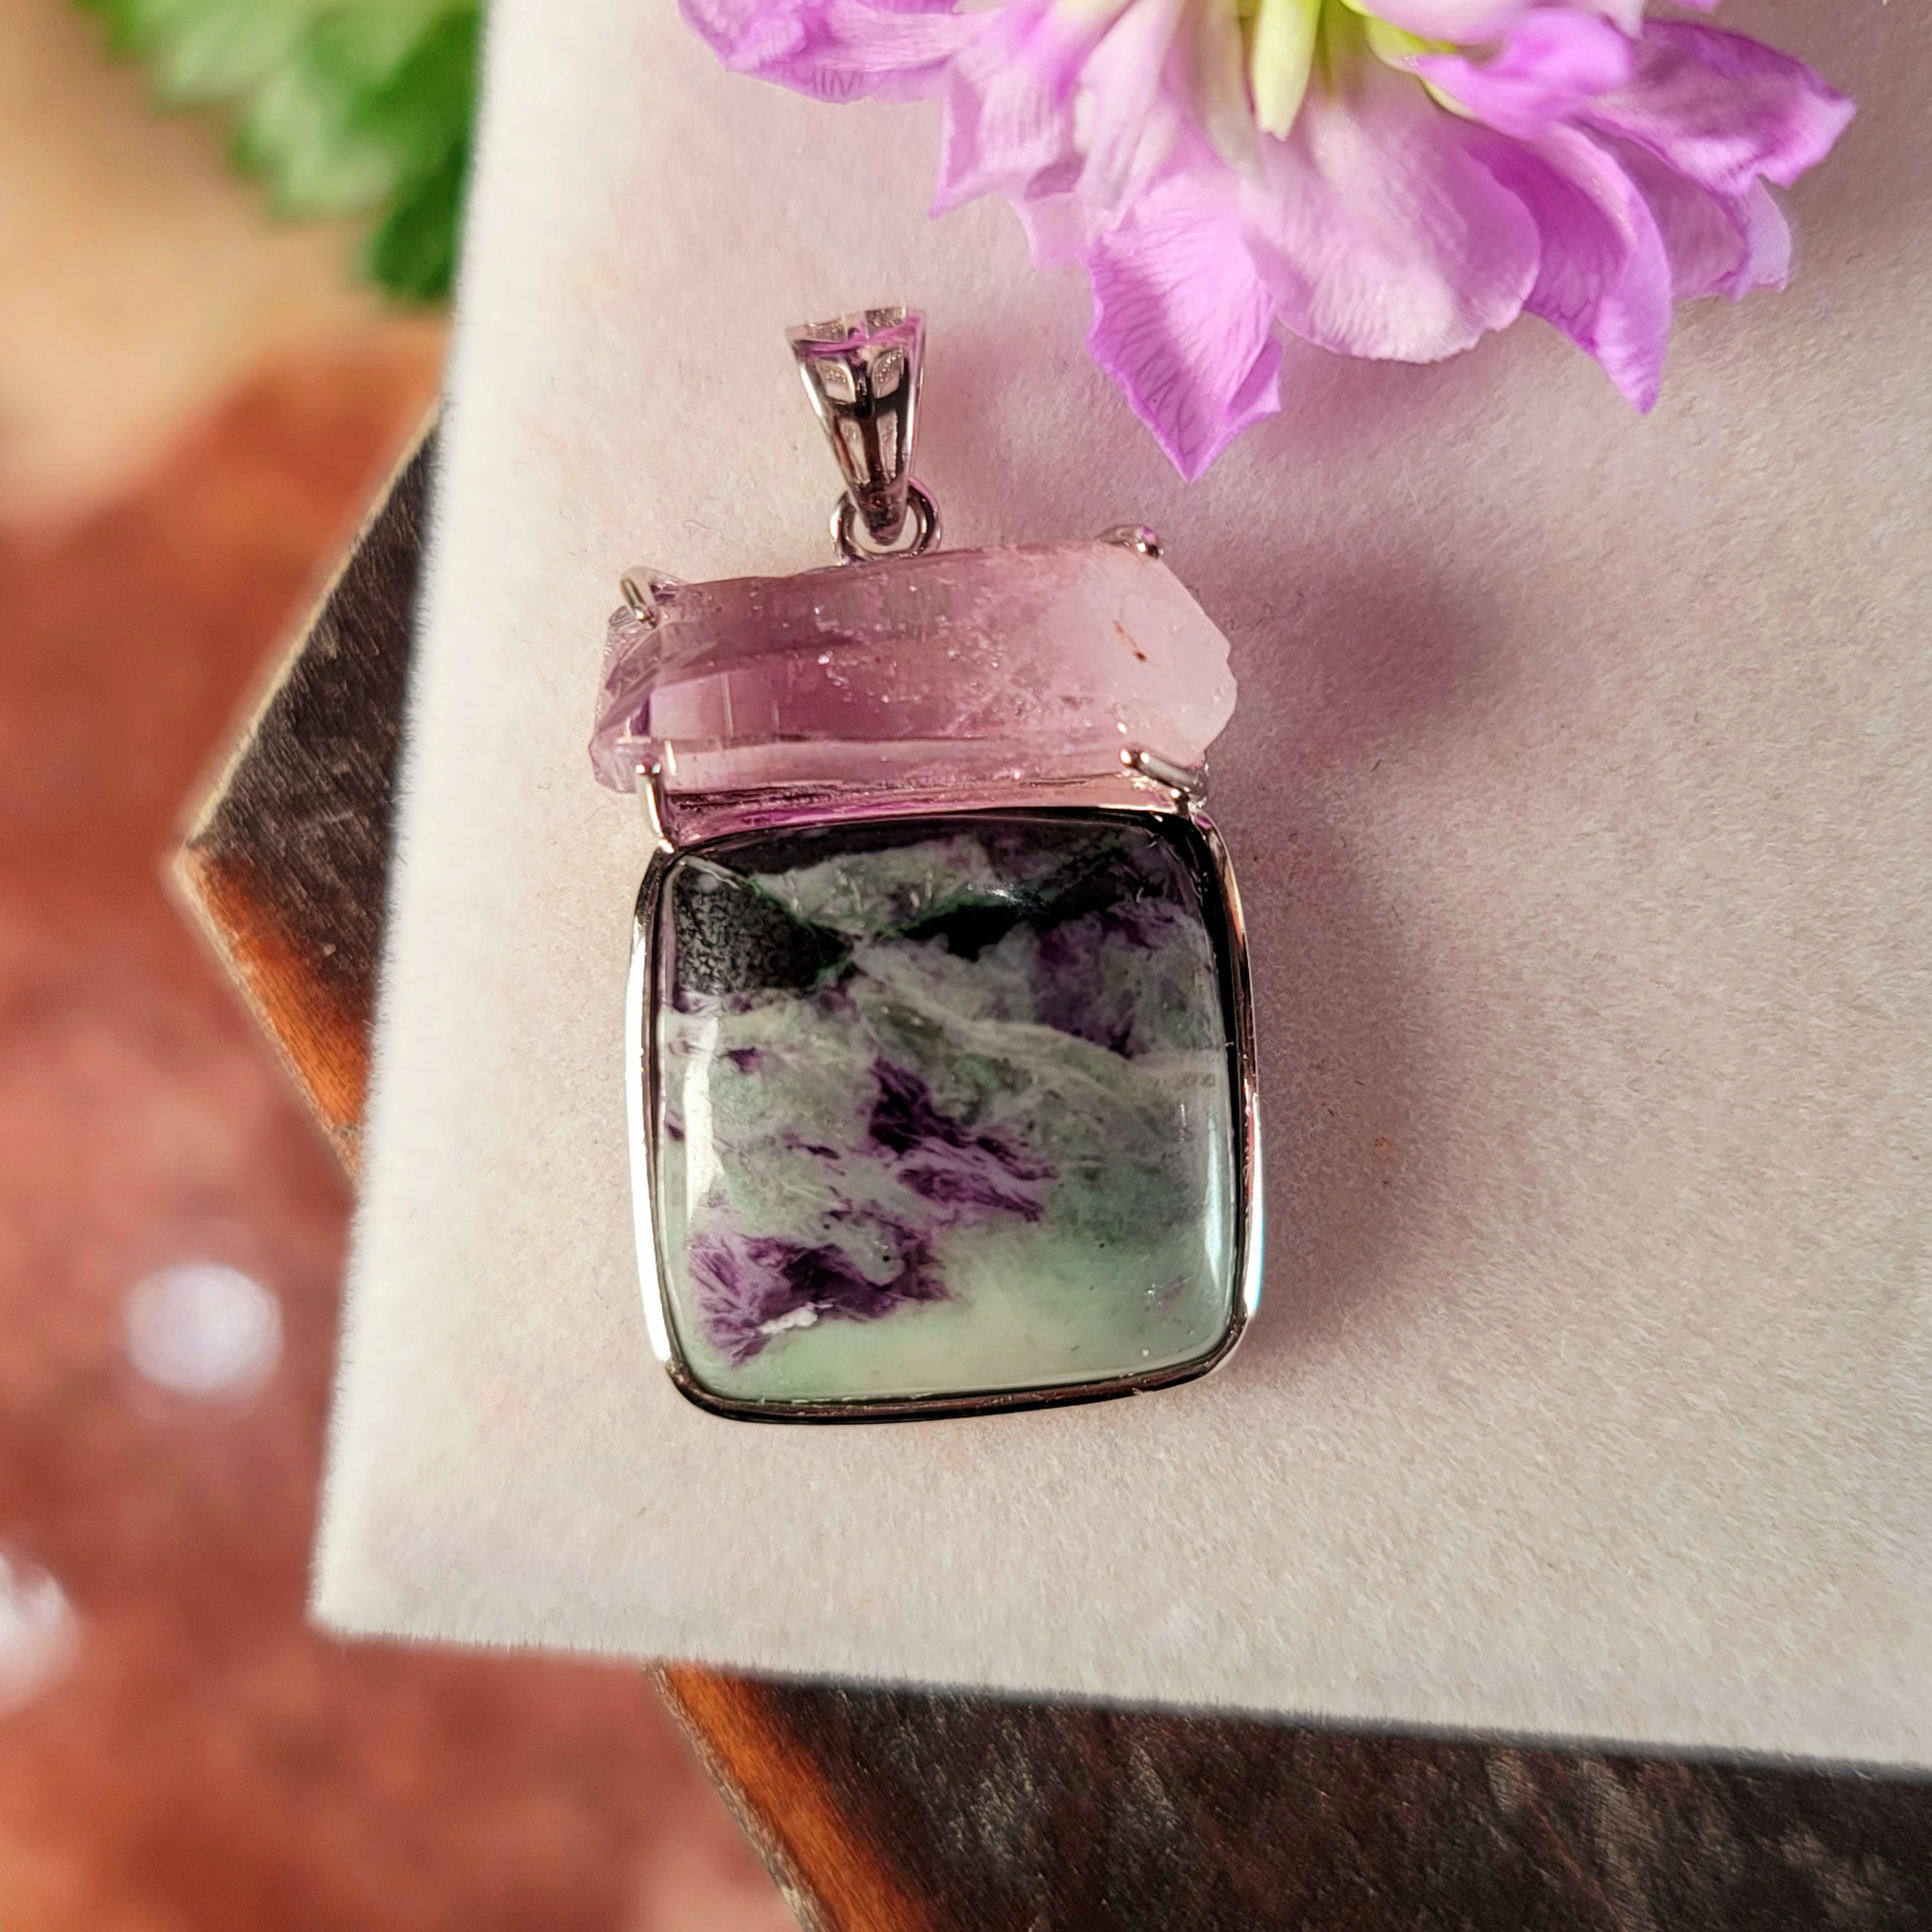 Kammererite x Vera Cruz Amethyst Pendant .925 Silver for Balance, Enlightenment and Communicating with Spirit